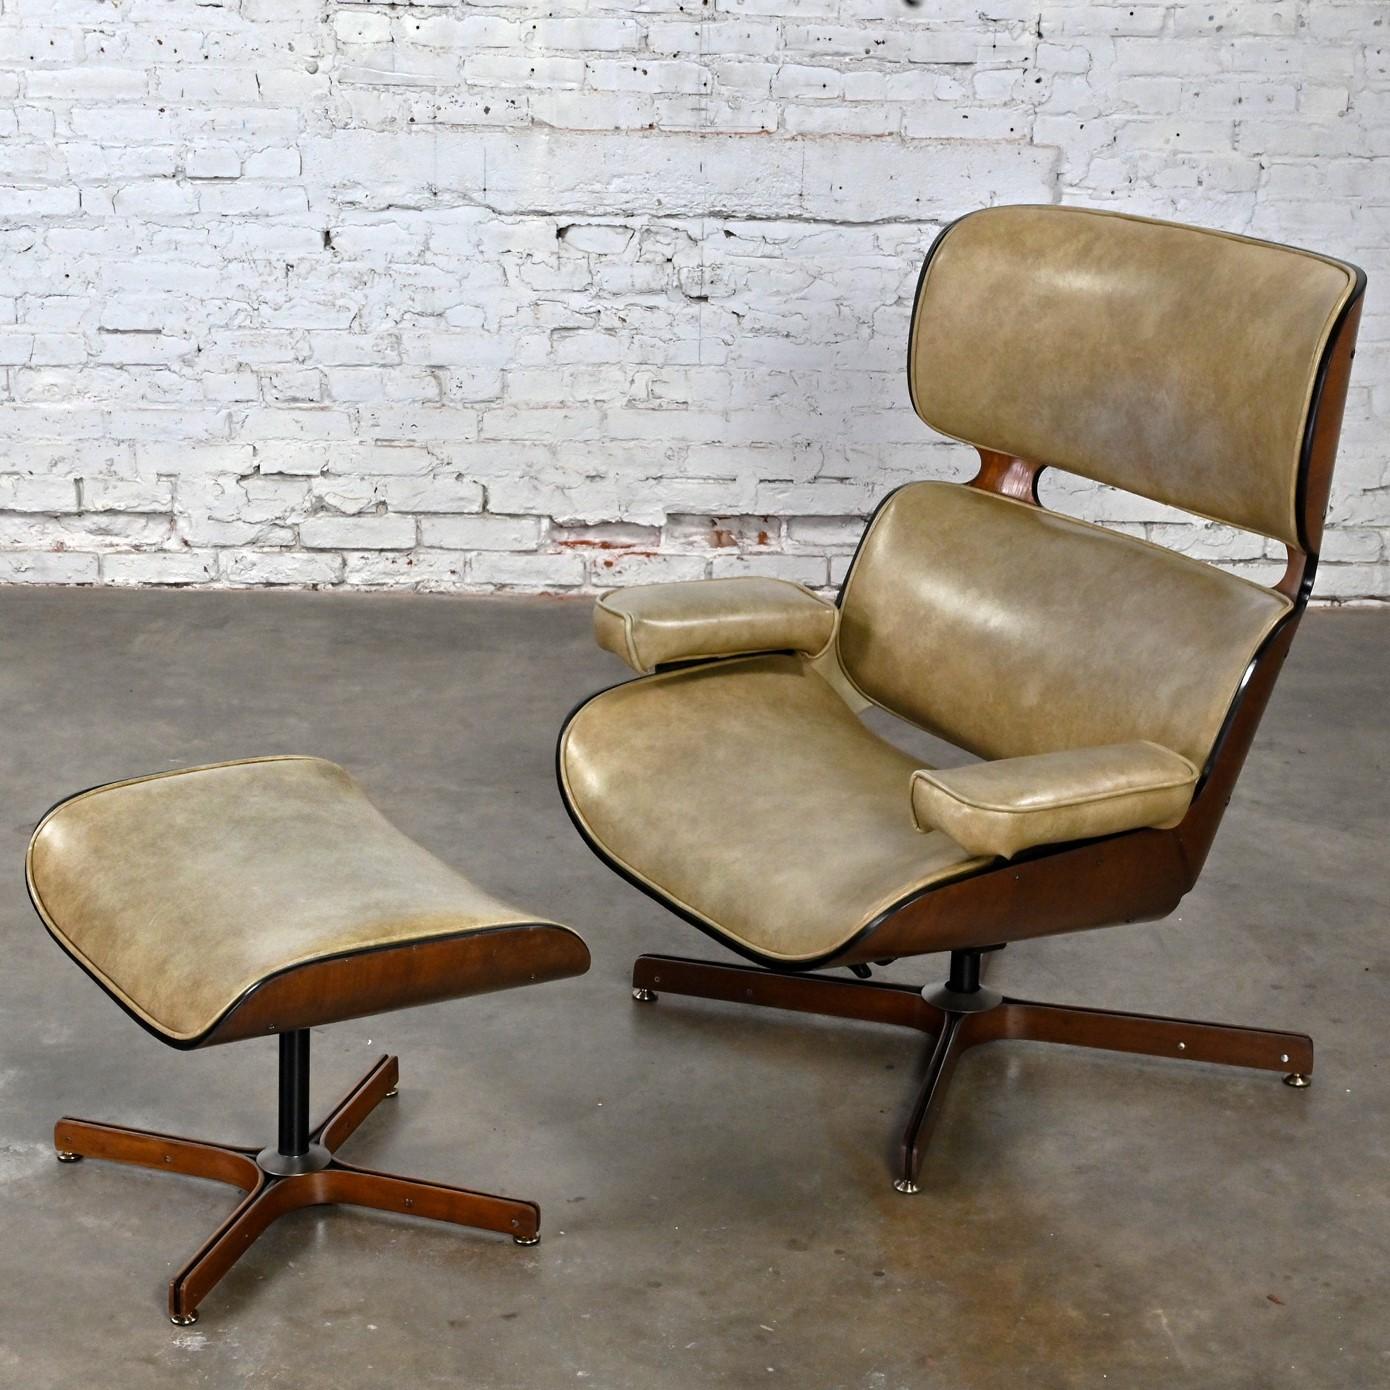 Mid 20th MCM Mr. Chair Lounge Chair & Ottoman by George Mulhauser for Plycraft In Good Condition For Sale In Topeka, KS